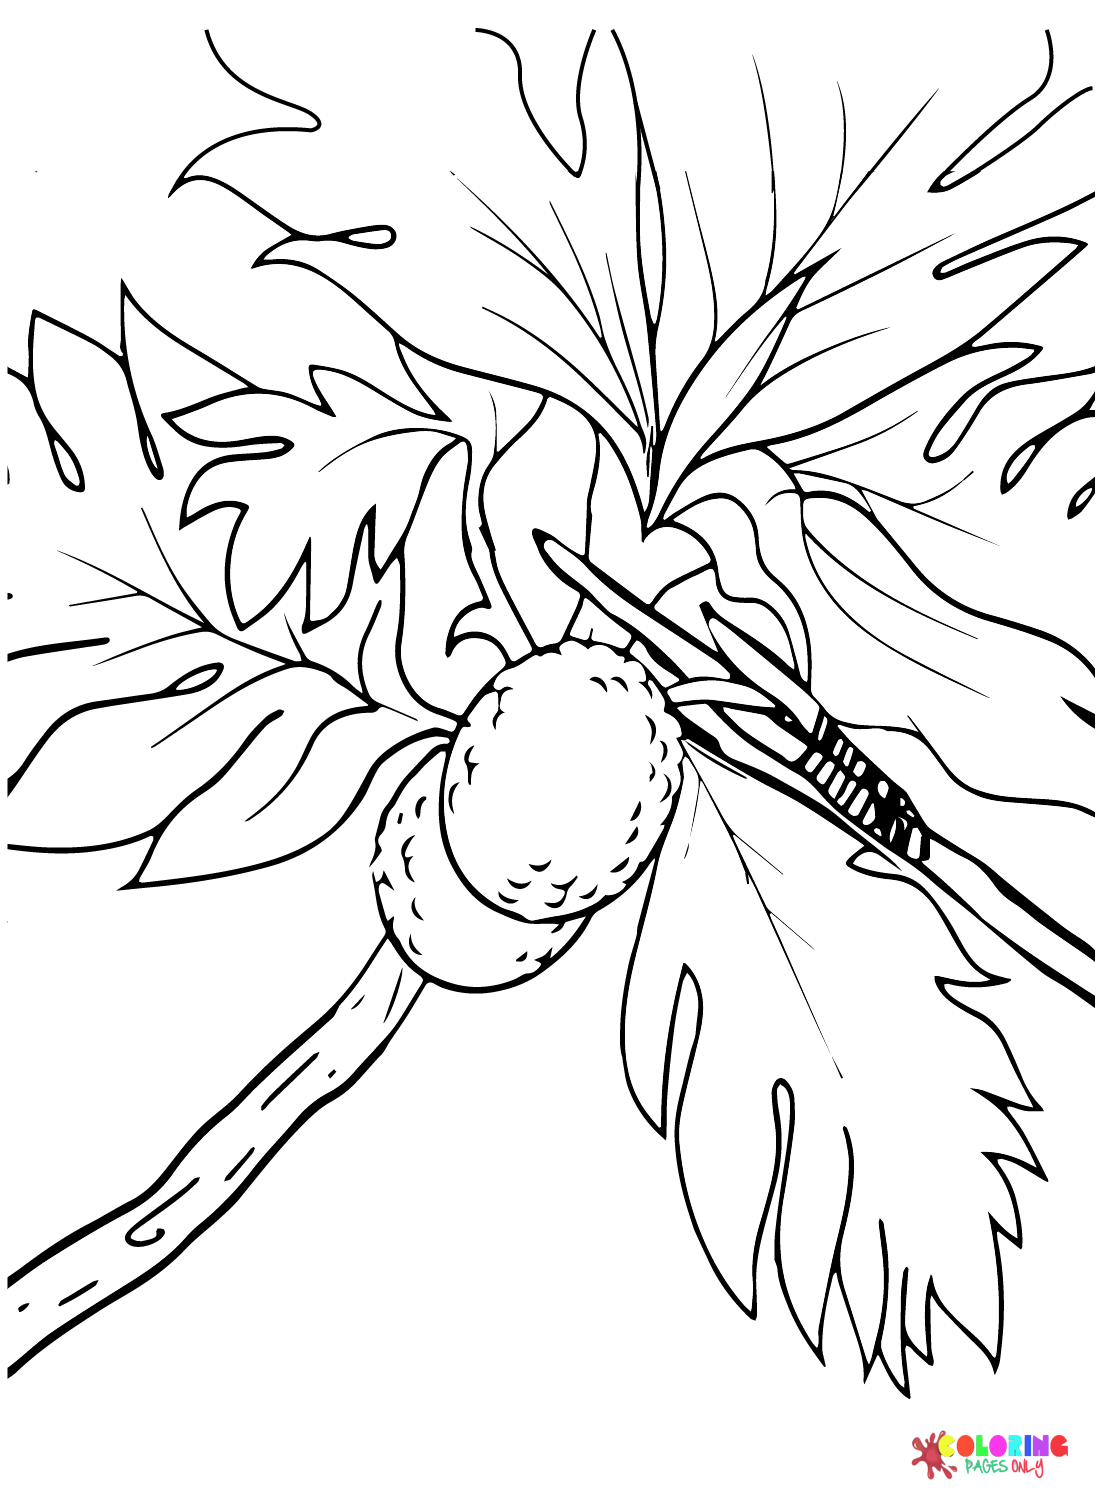 Breadfruit Branch Coloring Page